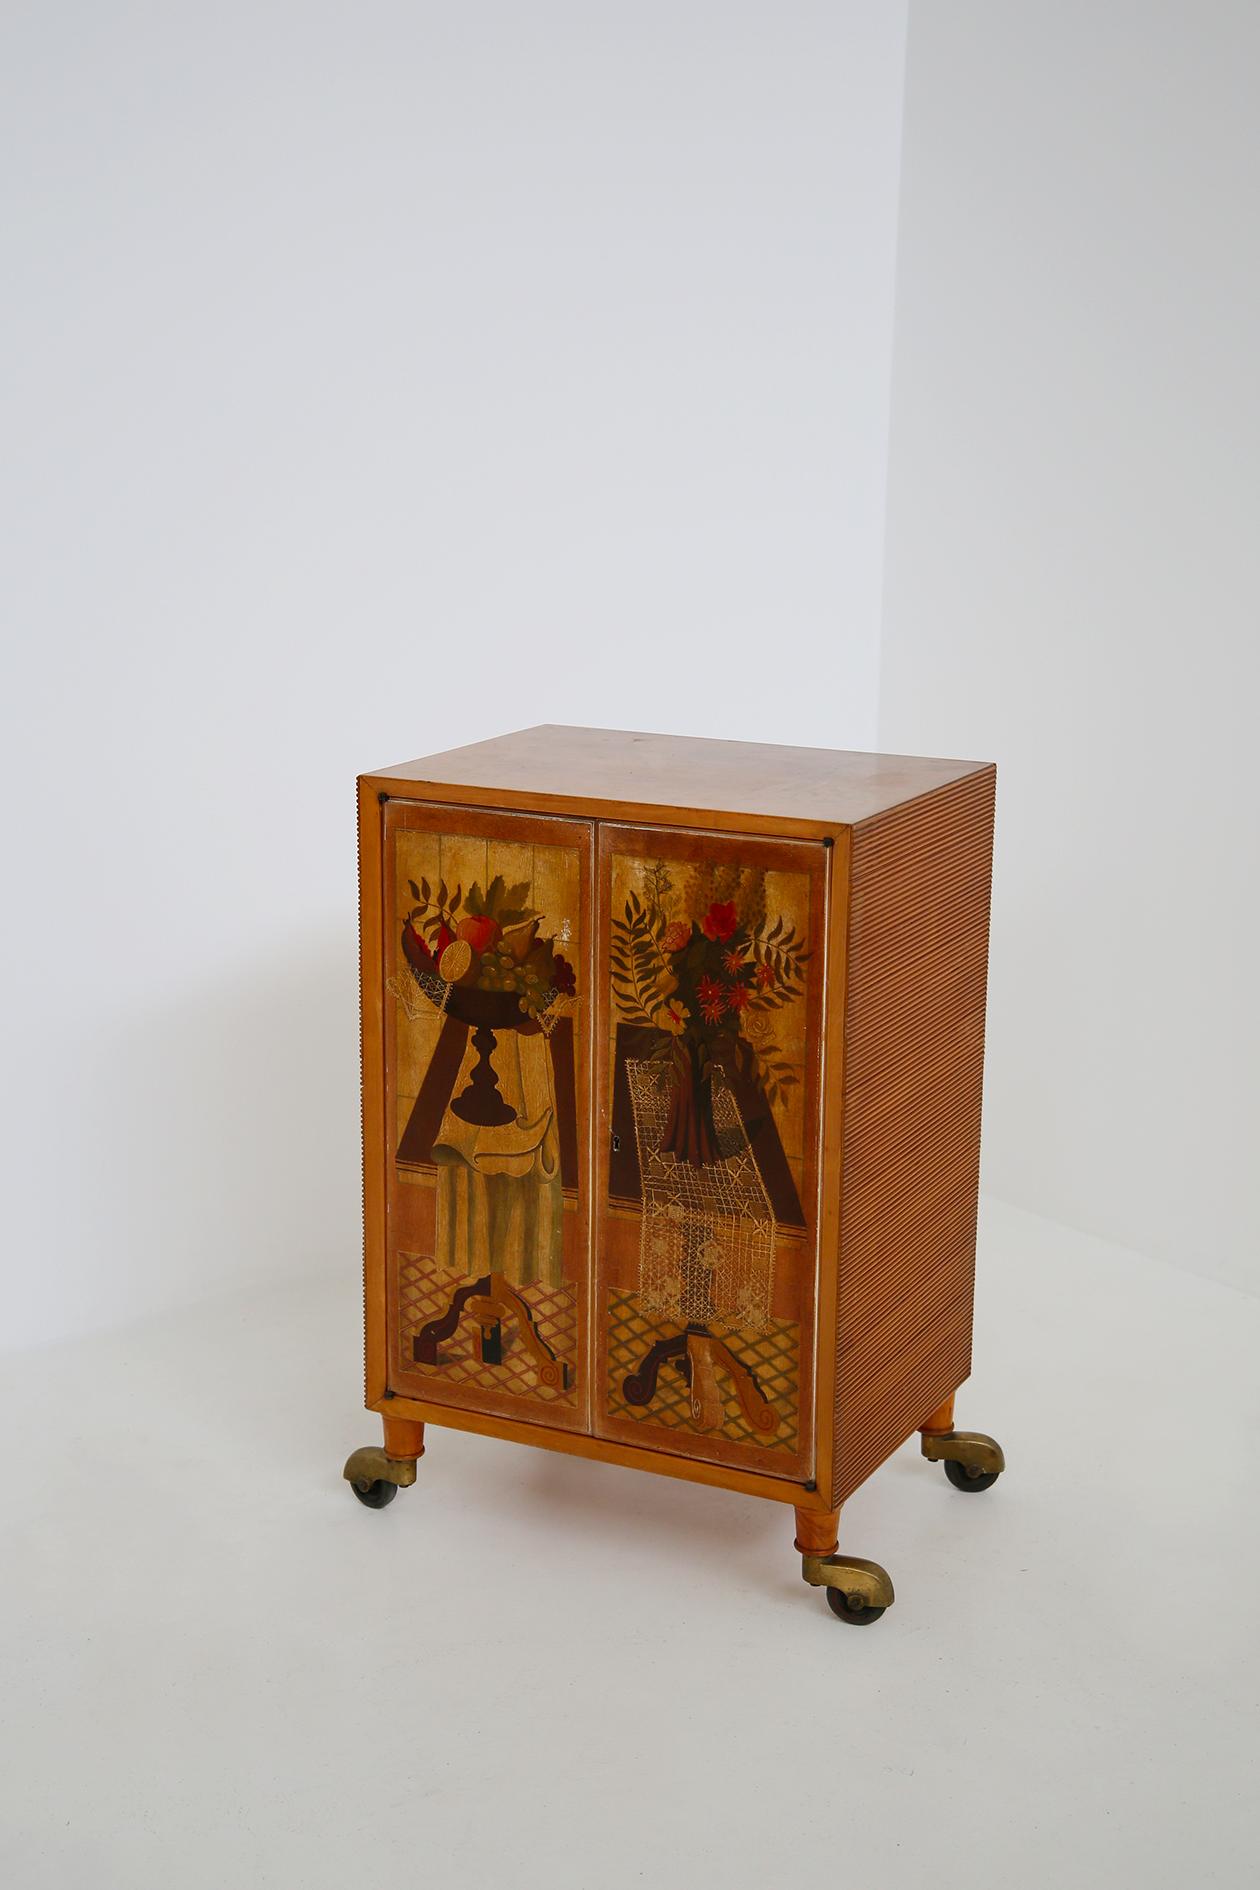 Scremin Luigi. Elegant and well represented cabinet designed by Marino Meo's preparatory cardboard. The production is by the Scremin Brothers, Belluno 1940s. With original label. The feet are made on wheels with brass wheel covers. The cabinet is